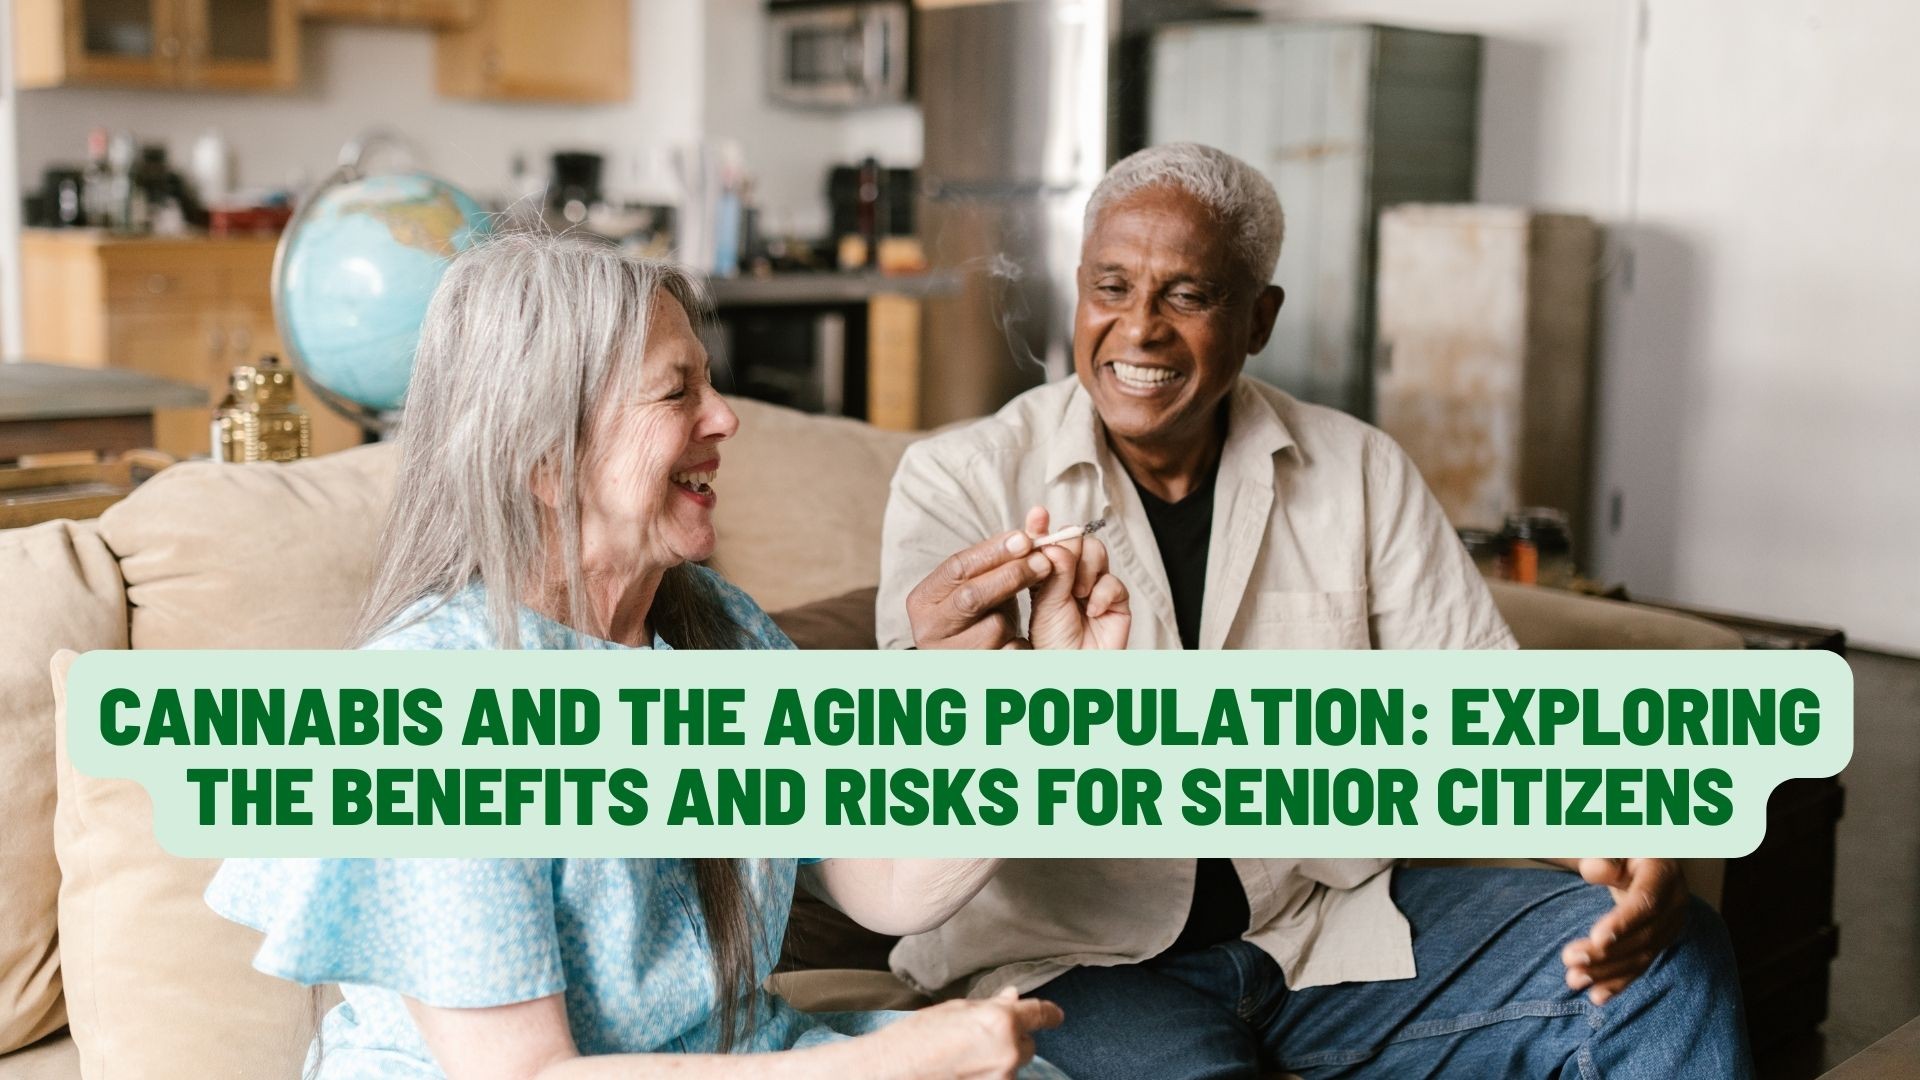 Cannabis and the Aging Population: Exploring the Benefits and Risks for Senior Citizens